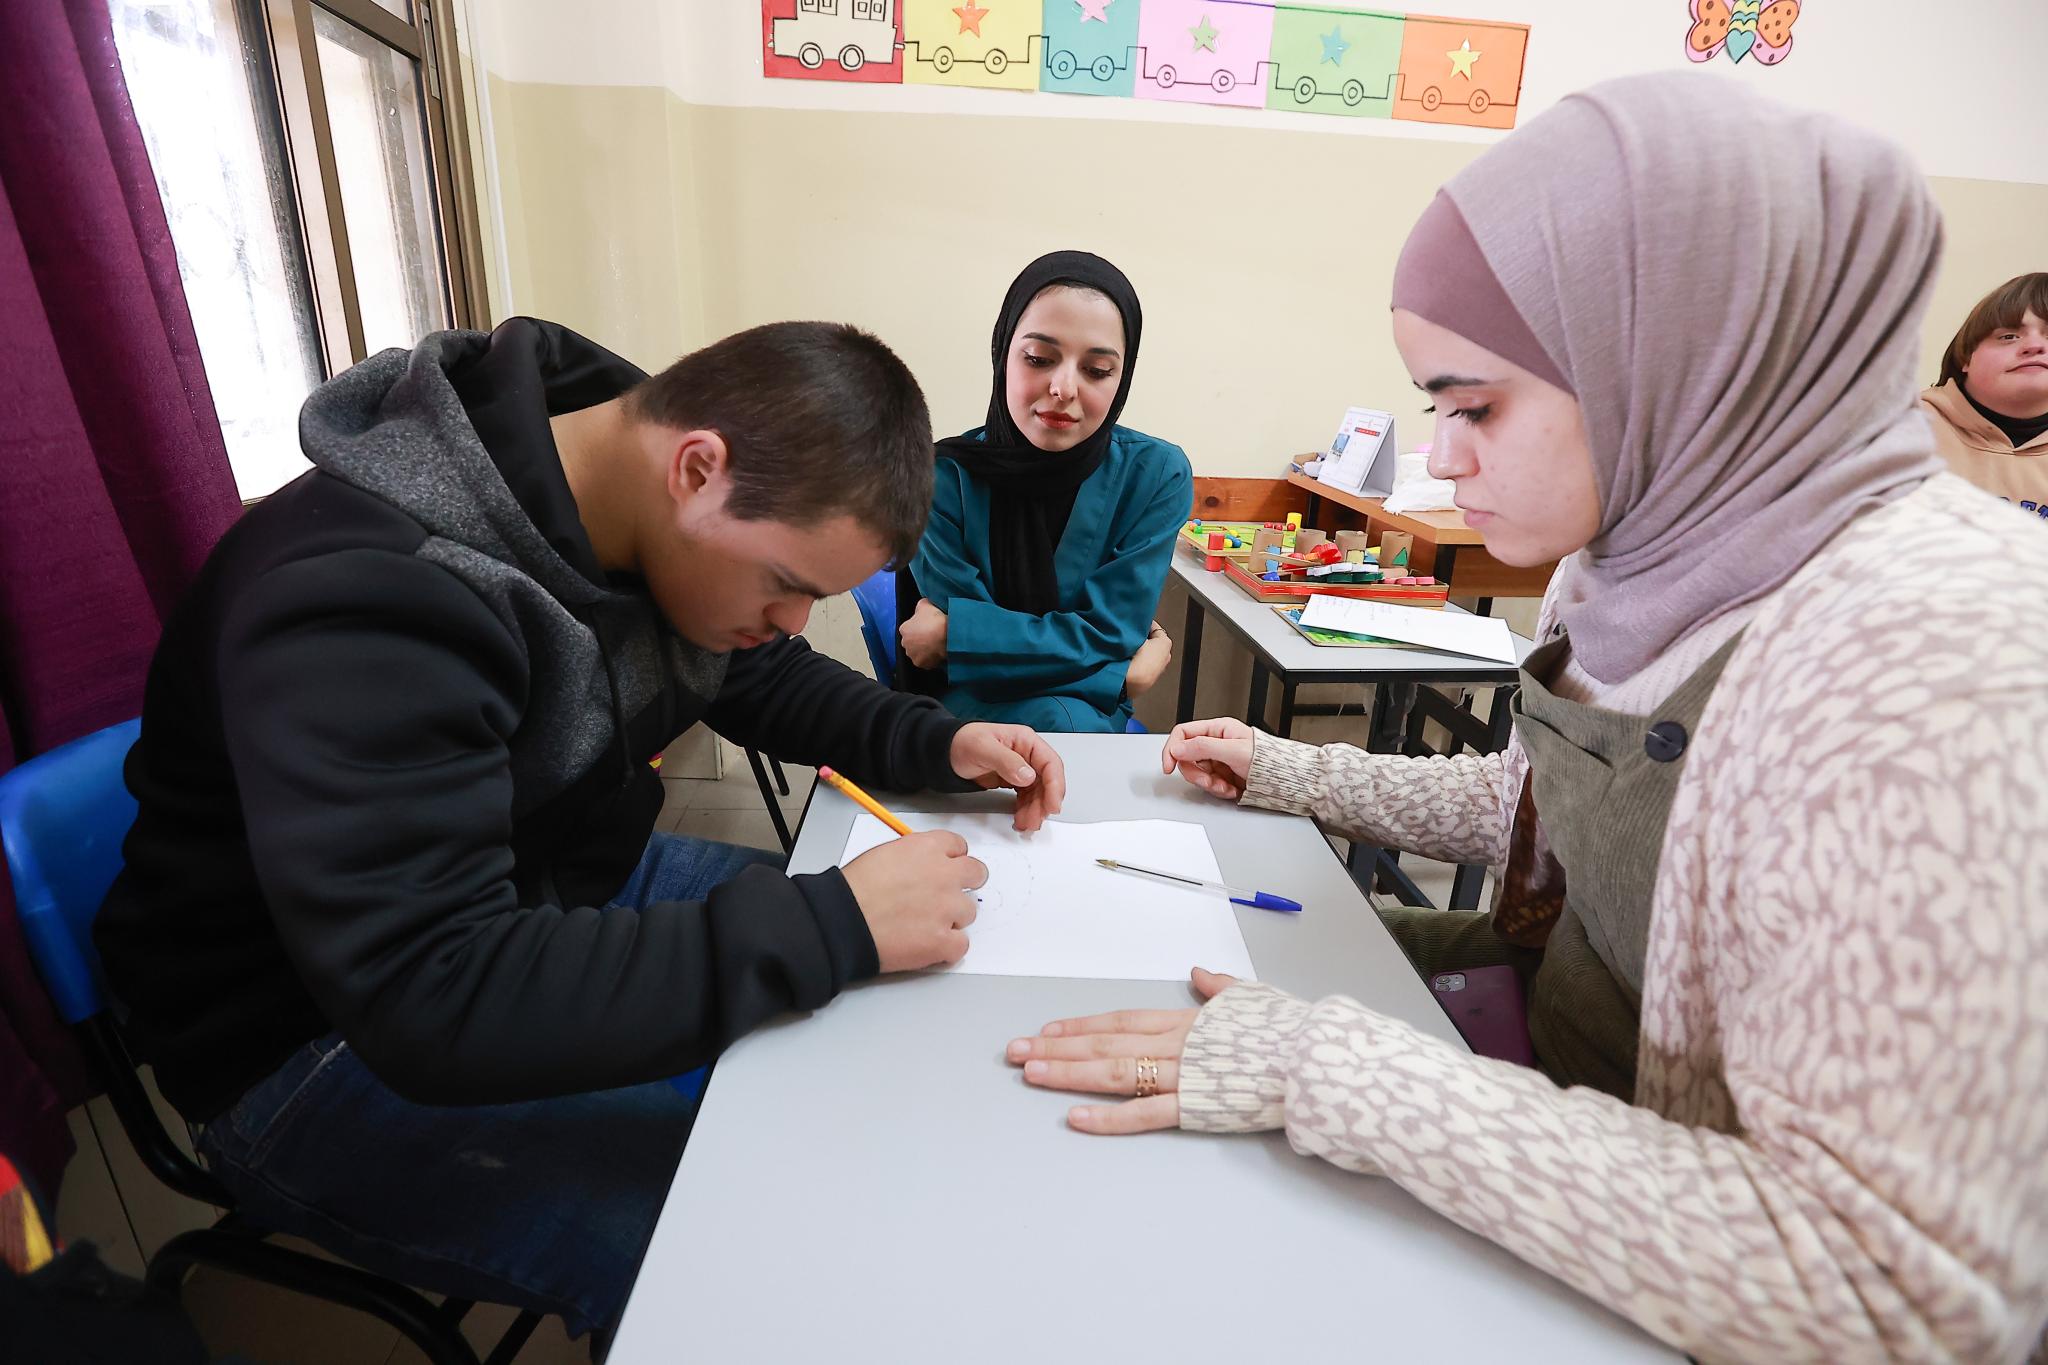 The Arab American University Holds an Activity for People with Special Needs